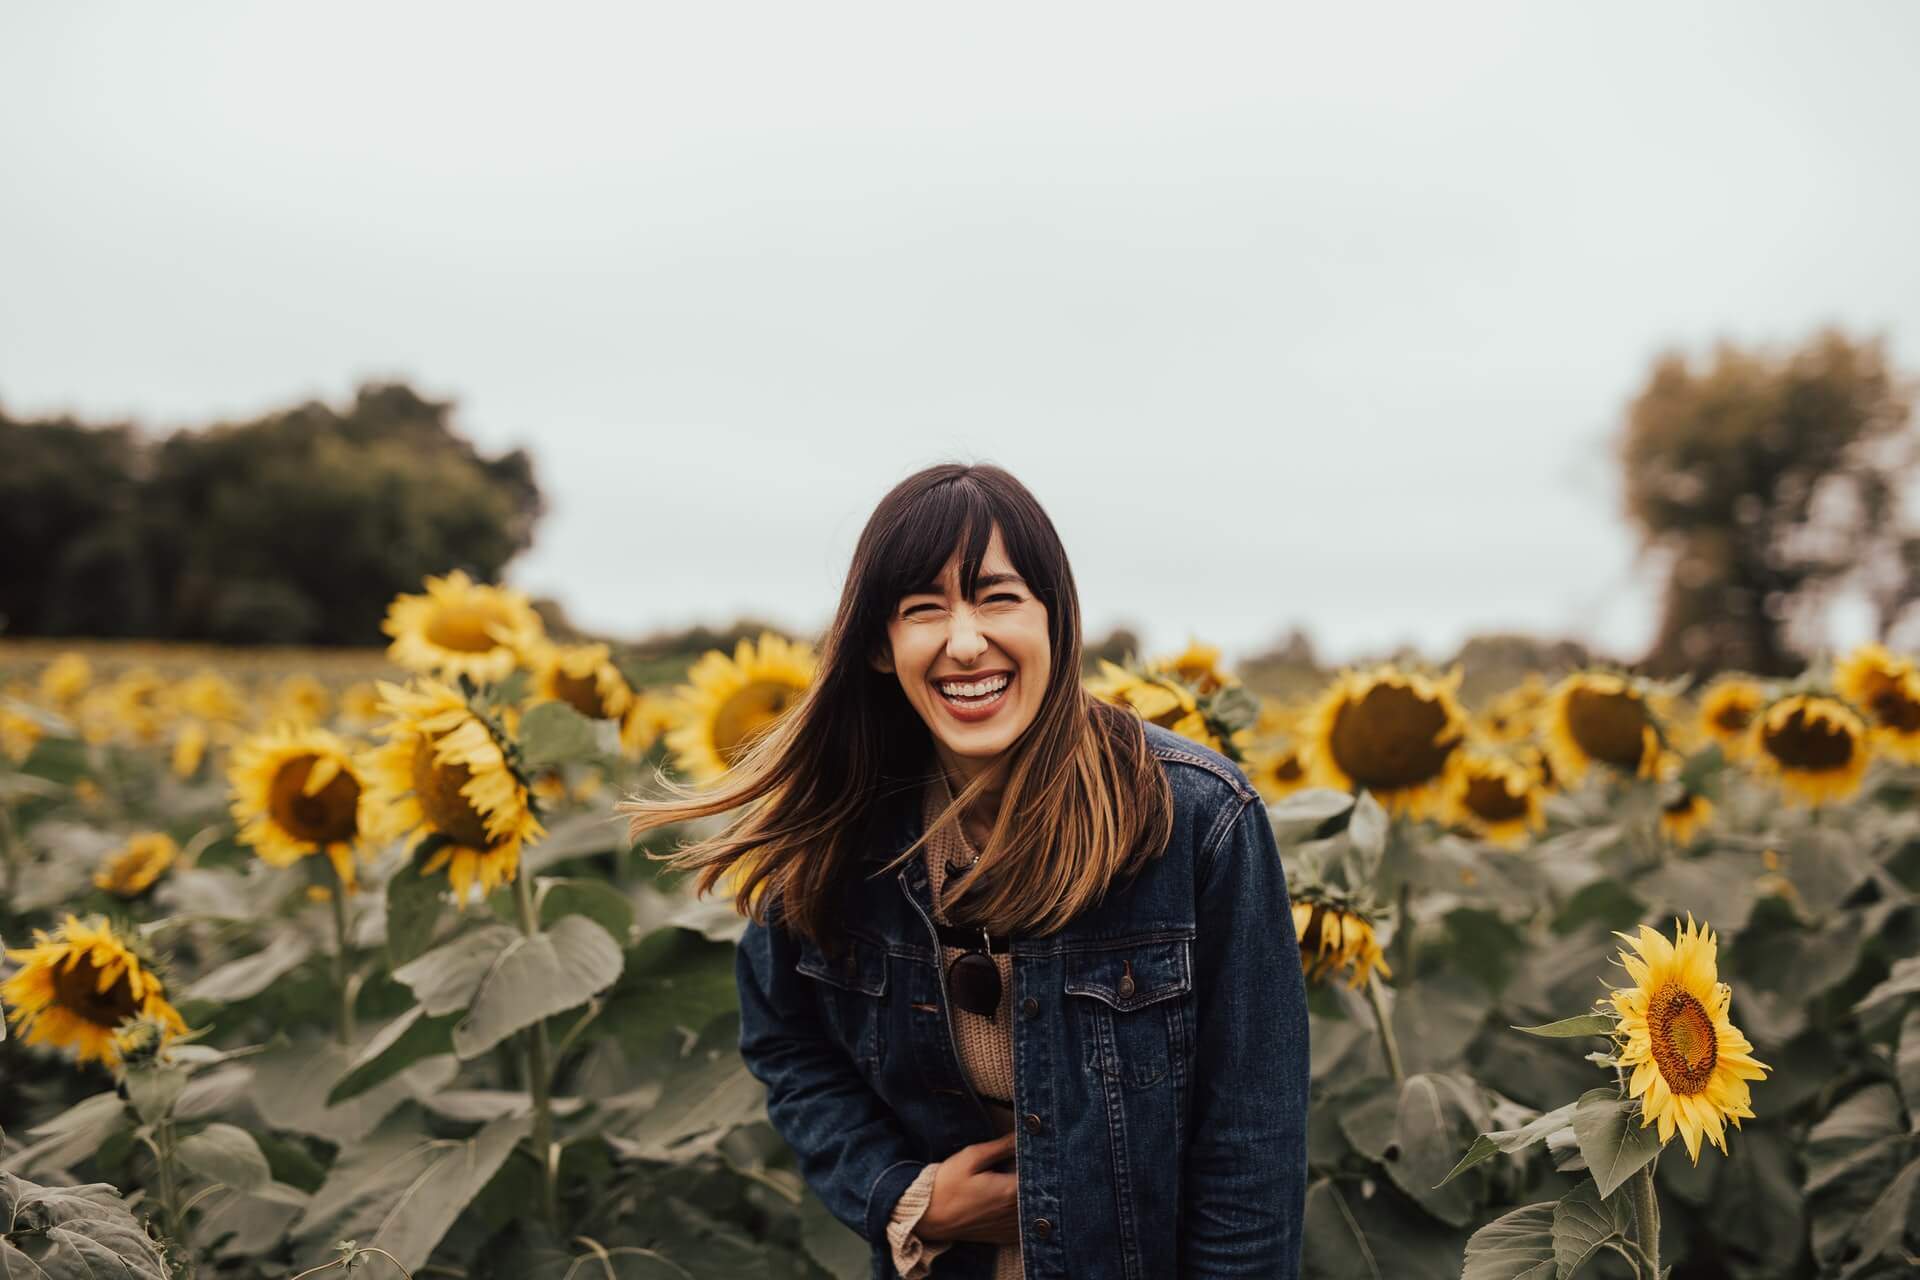 Woman in a sunflower field laughing with a French comedy